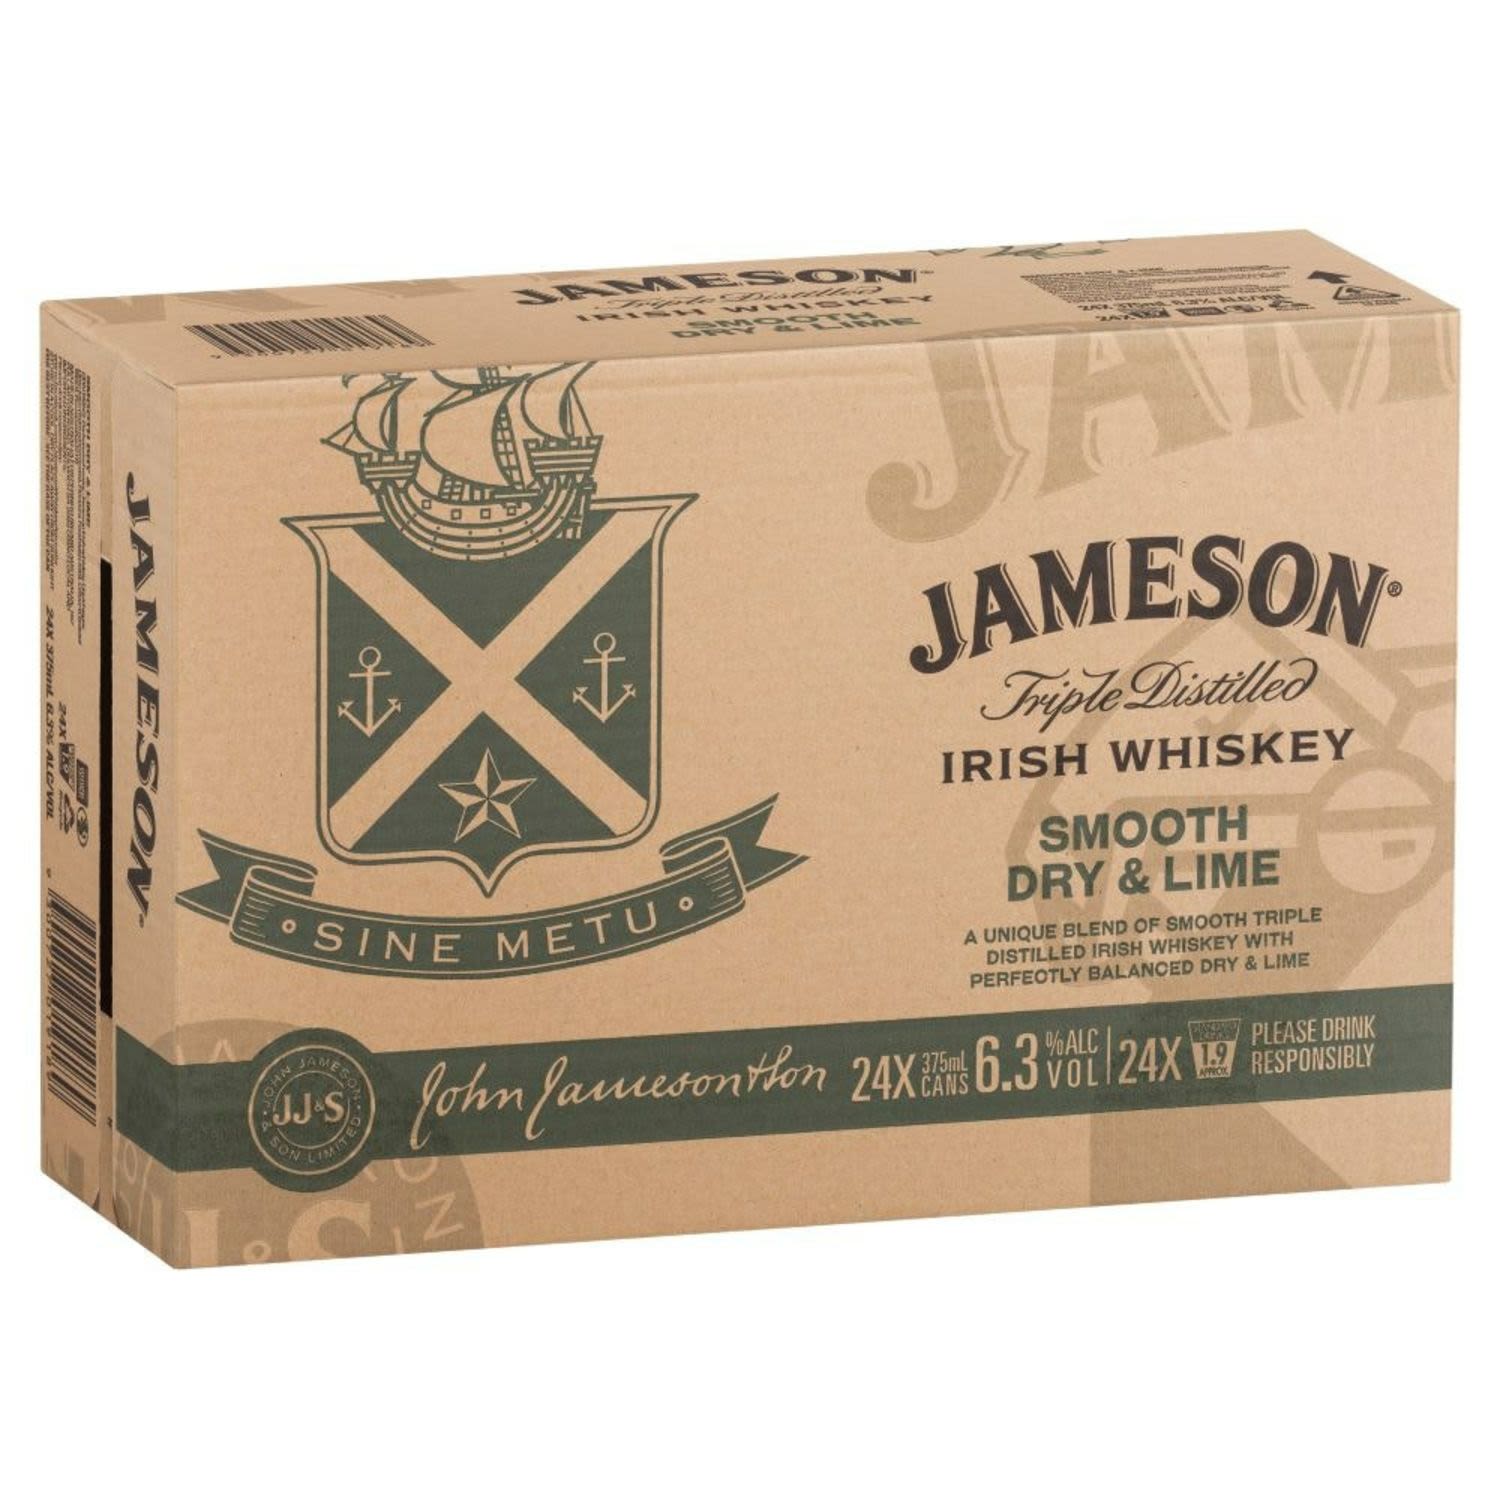 Jameson Irish Whiskey Dry & Lime 6.3% Can 375mL 24 Pack